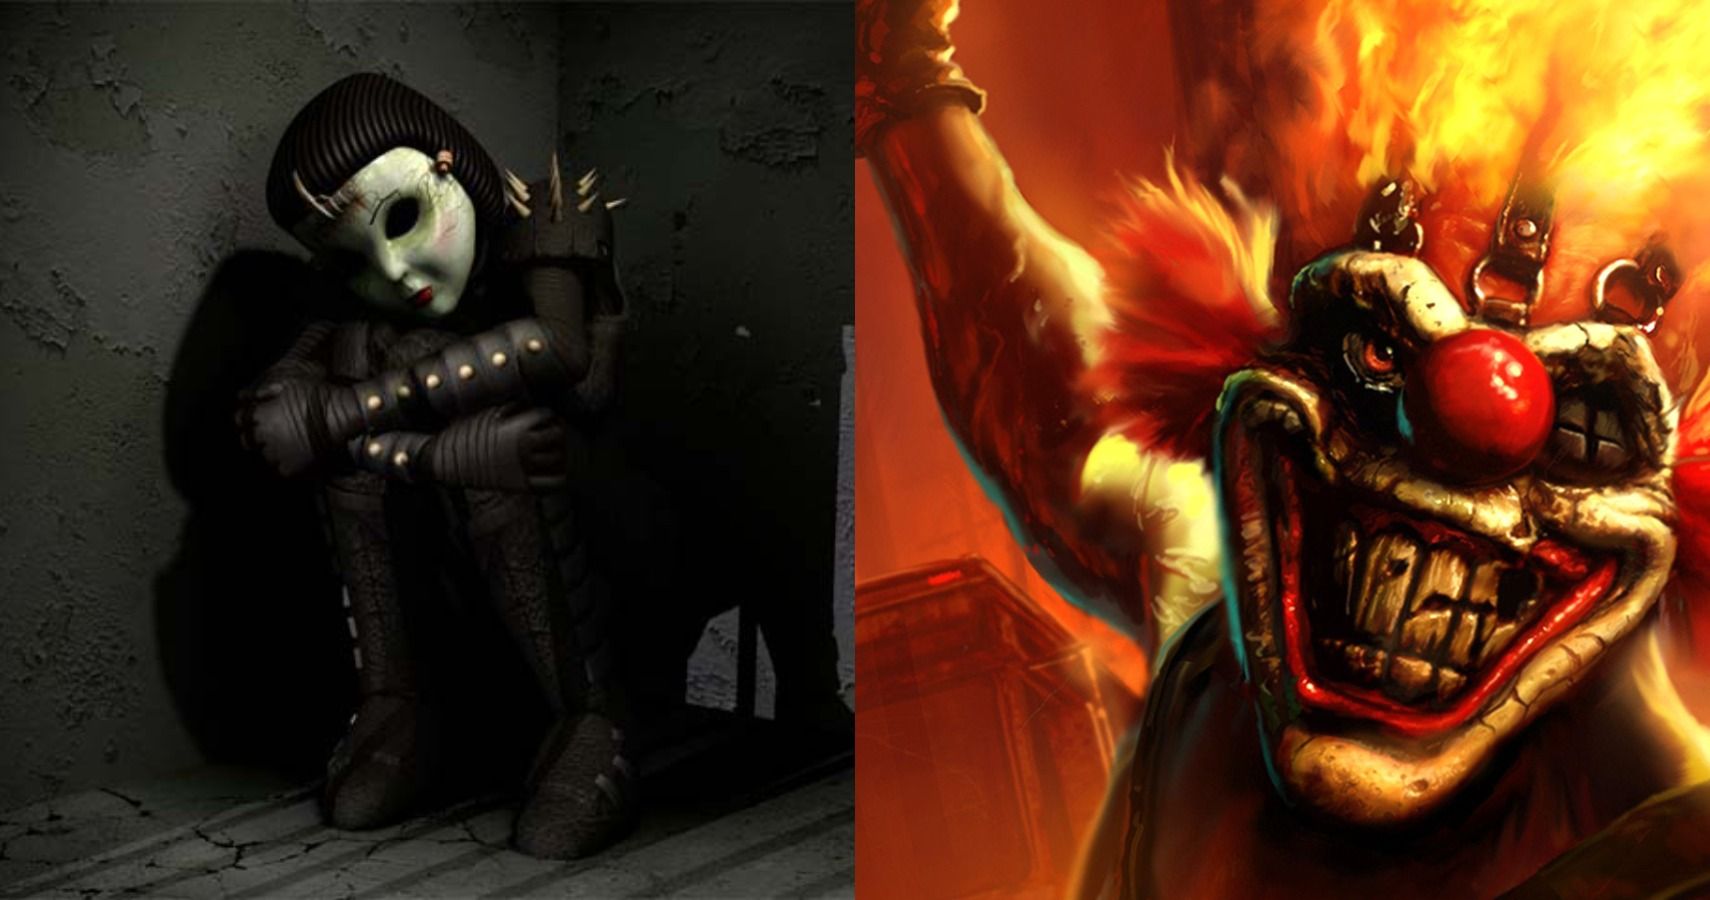 Twisted Metal Characters - Giant Bomb